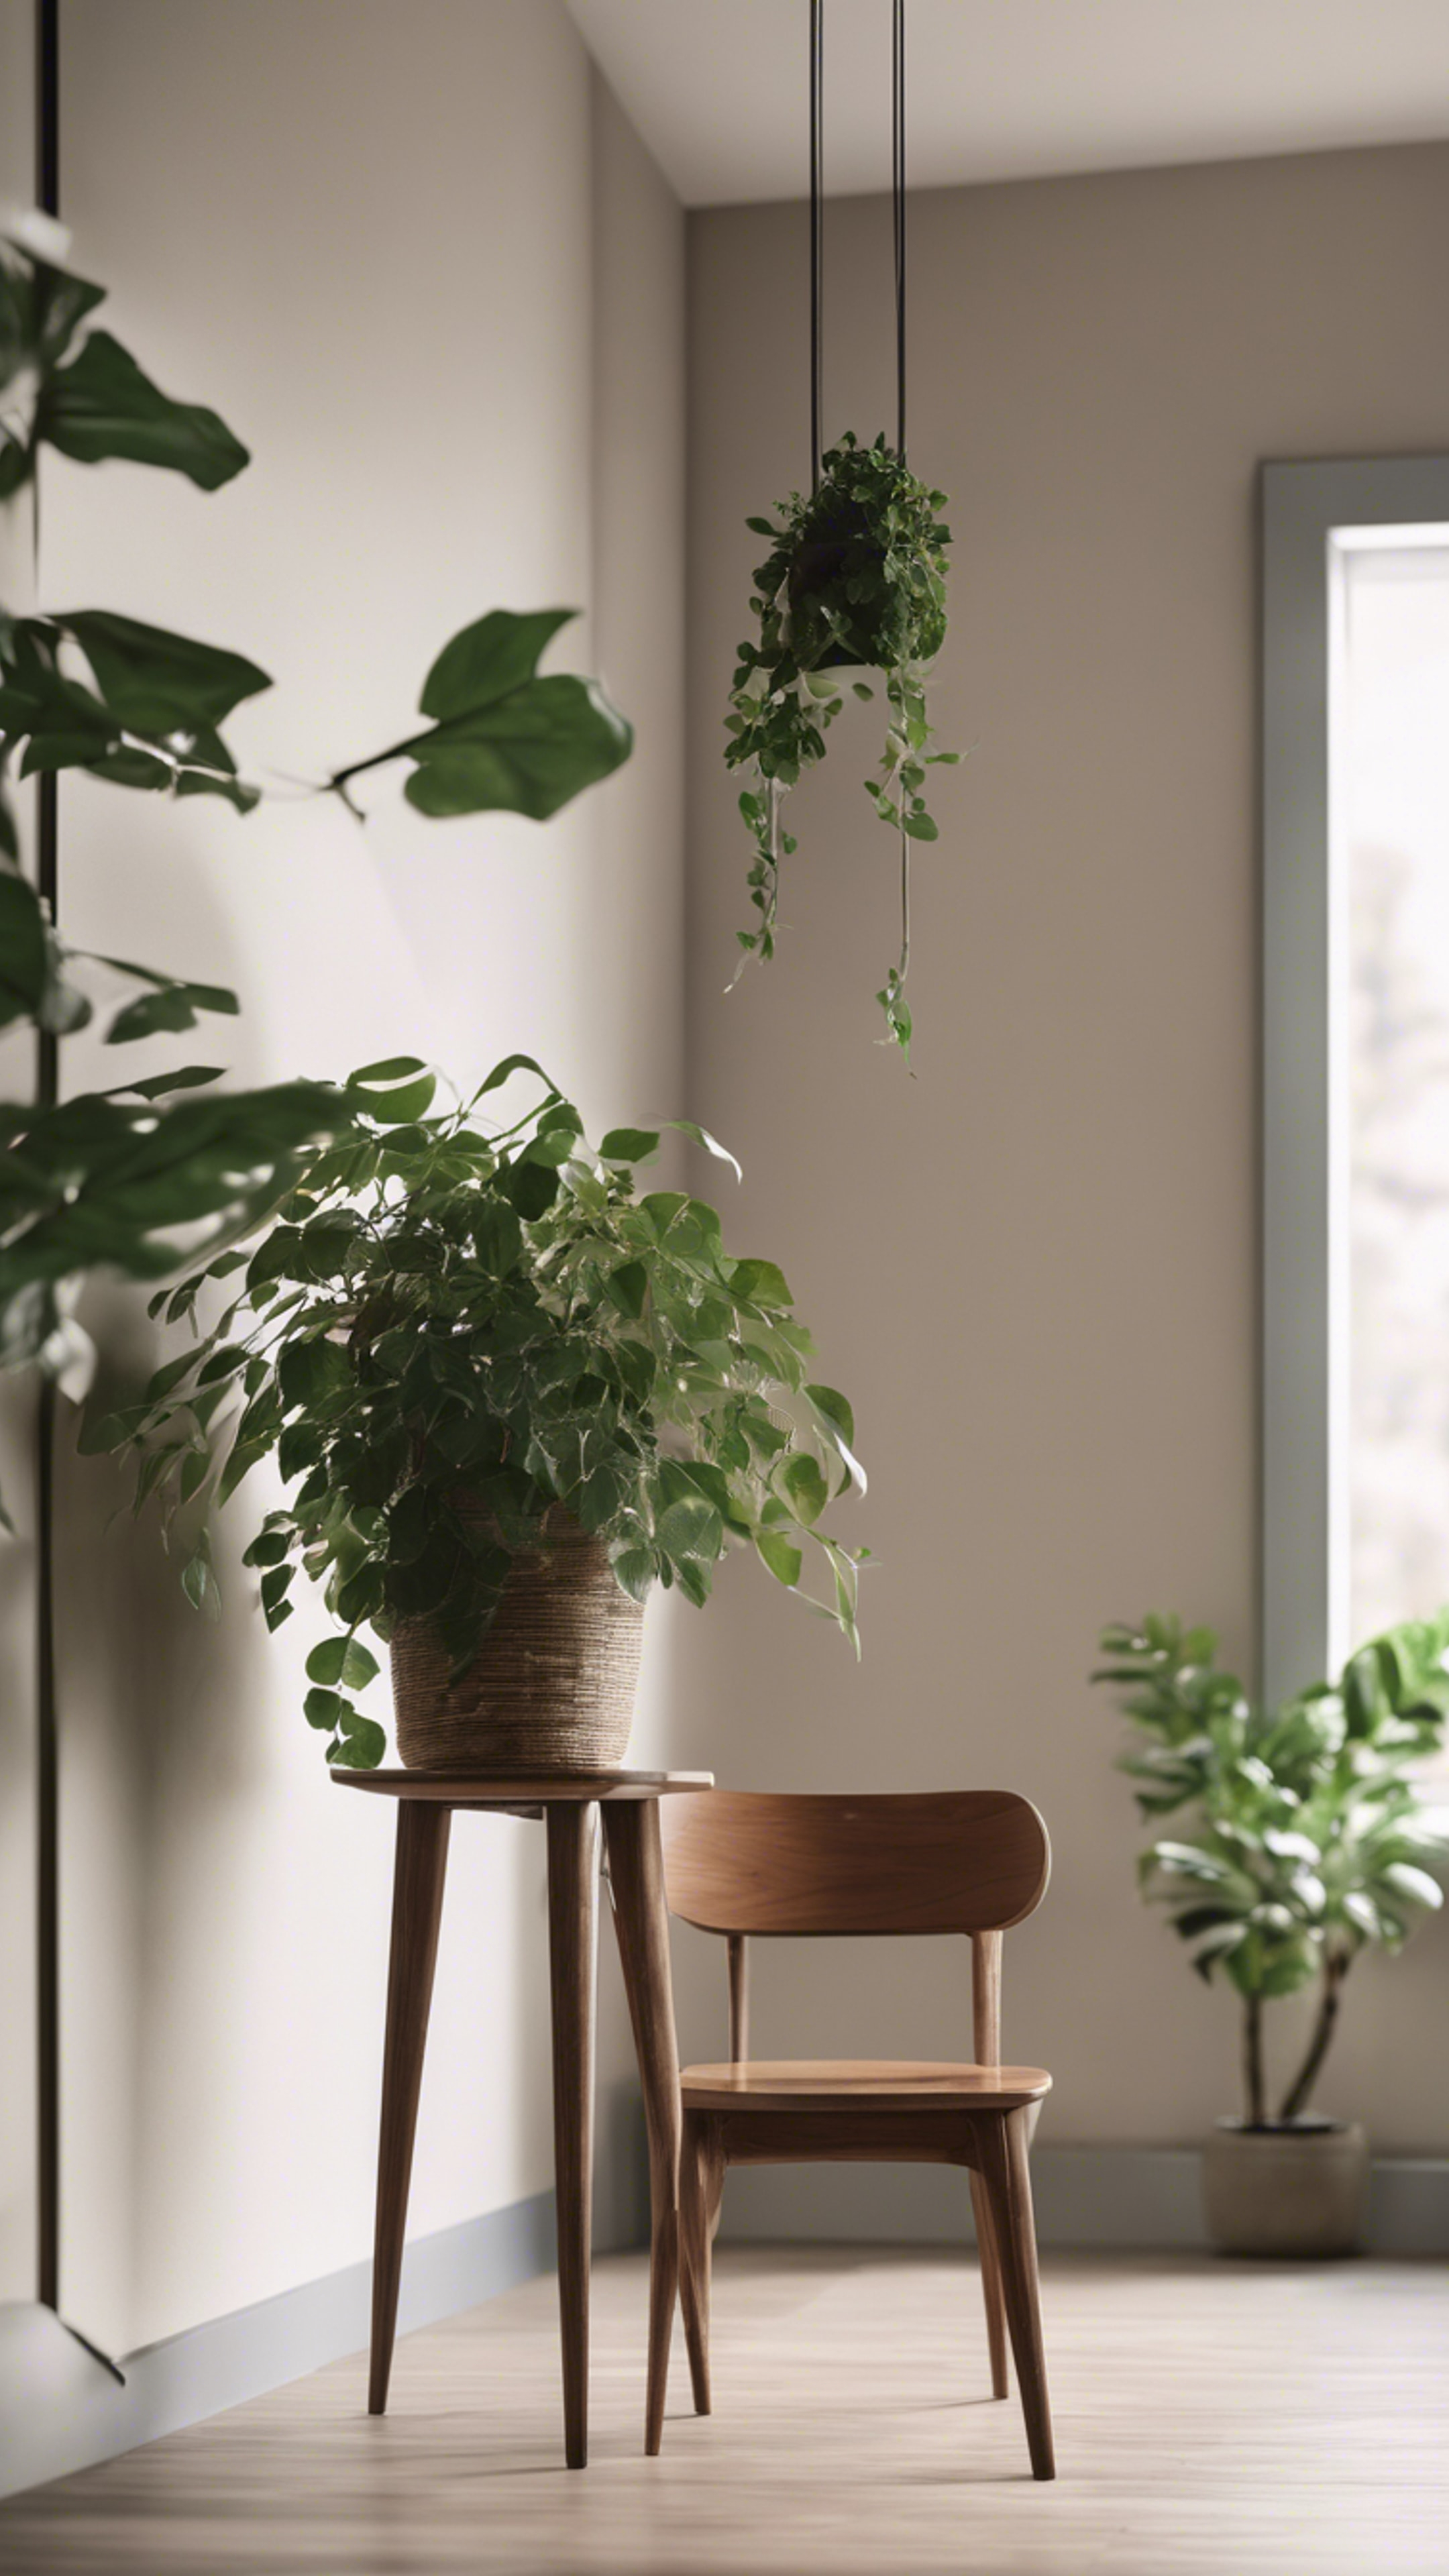 The corner of a minimalist room, featuring a hanging plant and a low, wooden side table. Tapet[20a0de2ec9c541069b04]